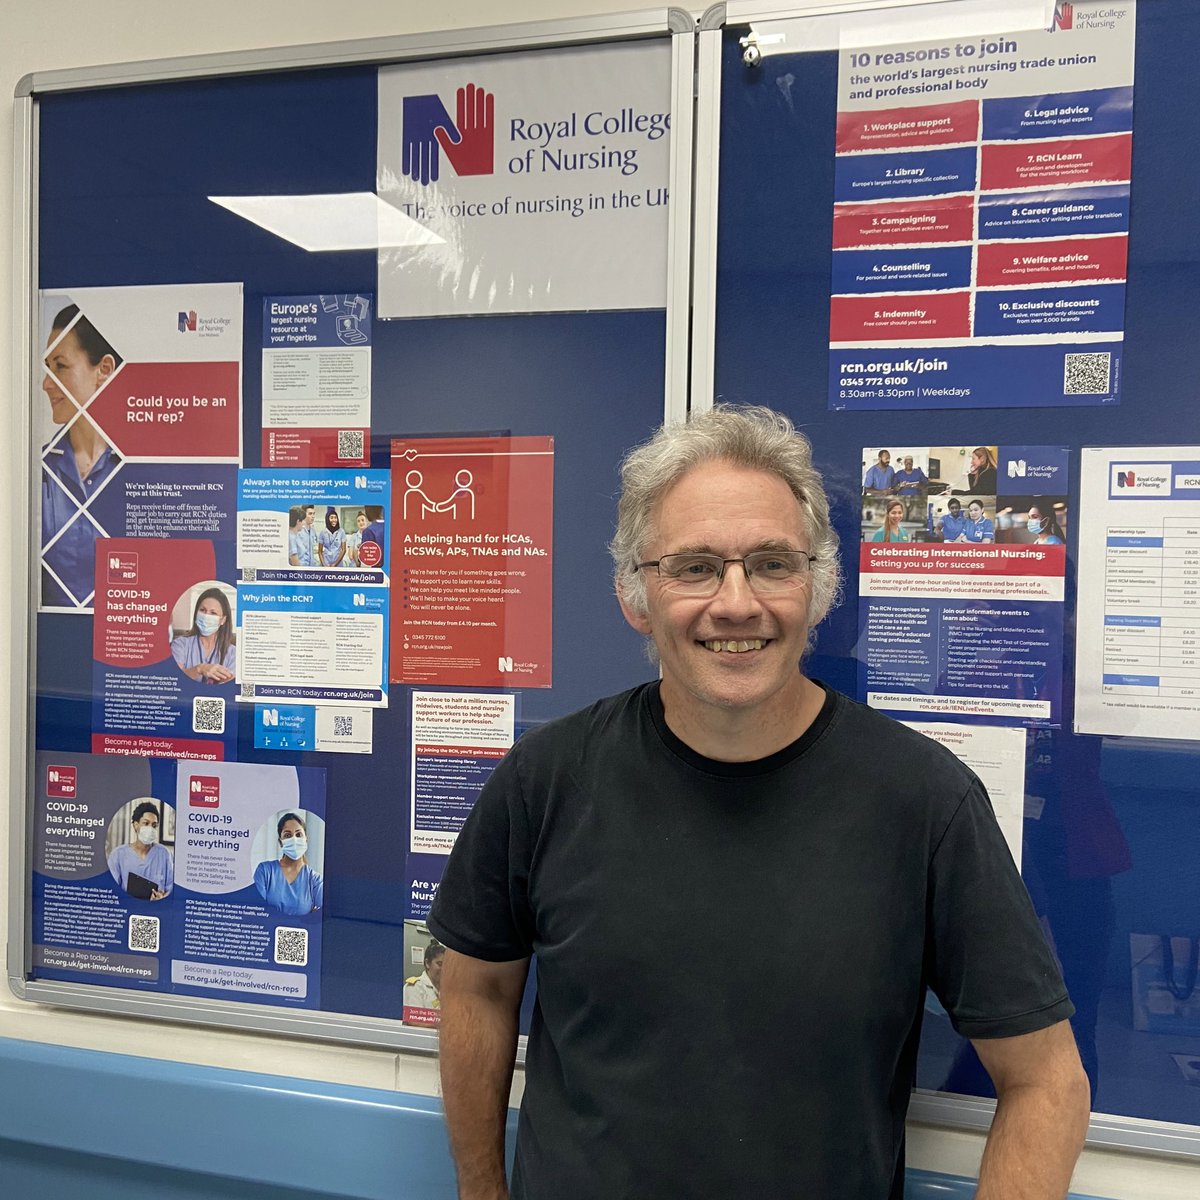 Great working with RCN Steward Dave Sutcliffe today - creating the new look RCN members’ noticeboard at Leicester Royal Infirmary @Leic_hospital Finishing touch will be our RCN Reps’ & Leicestershire & Rutland Branch details 👍 @rcnLeicester @RCNEastMids @Davidsooty